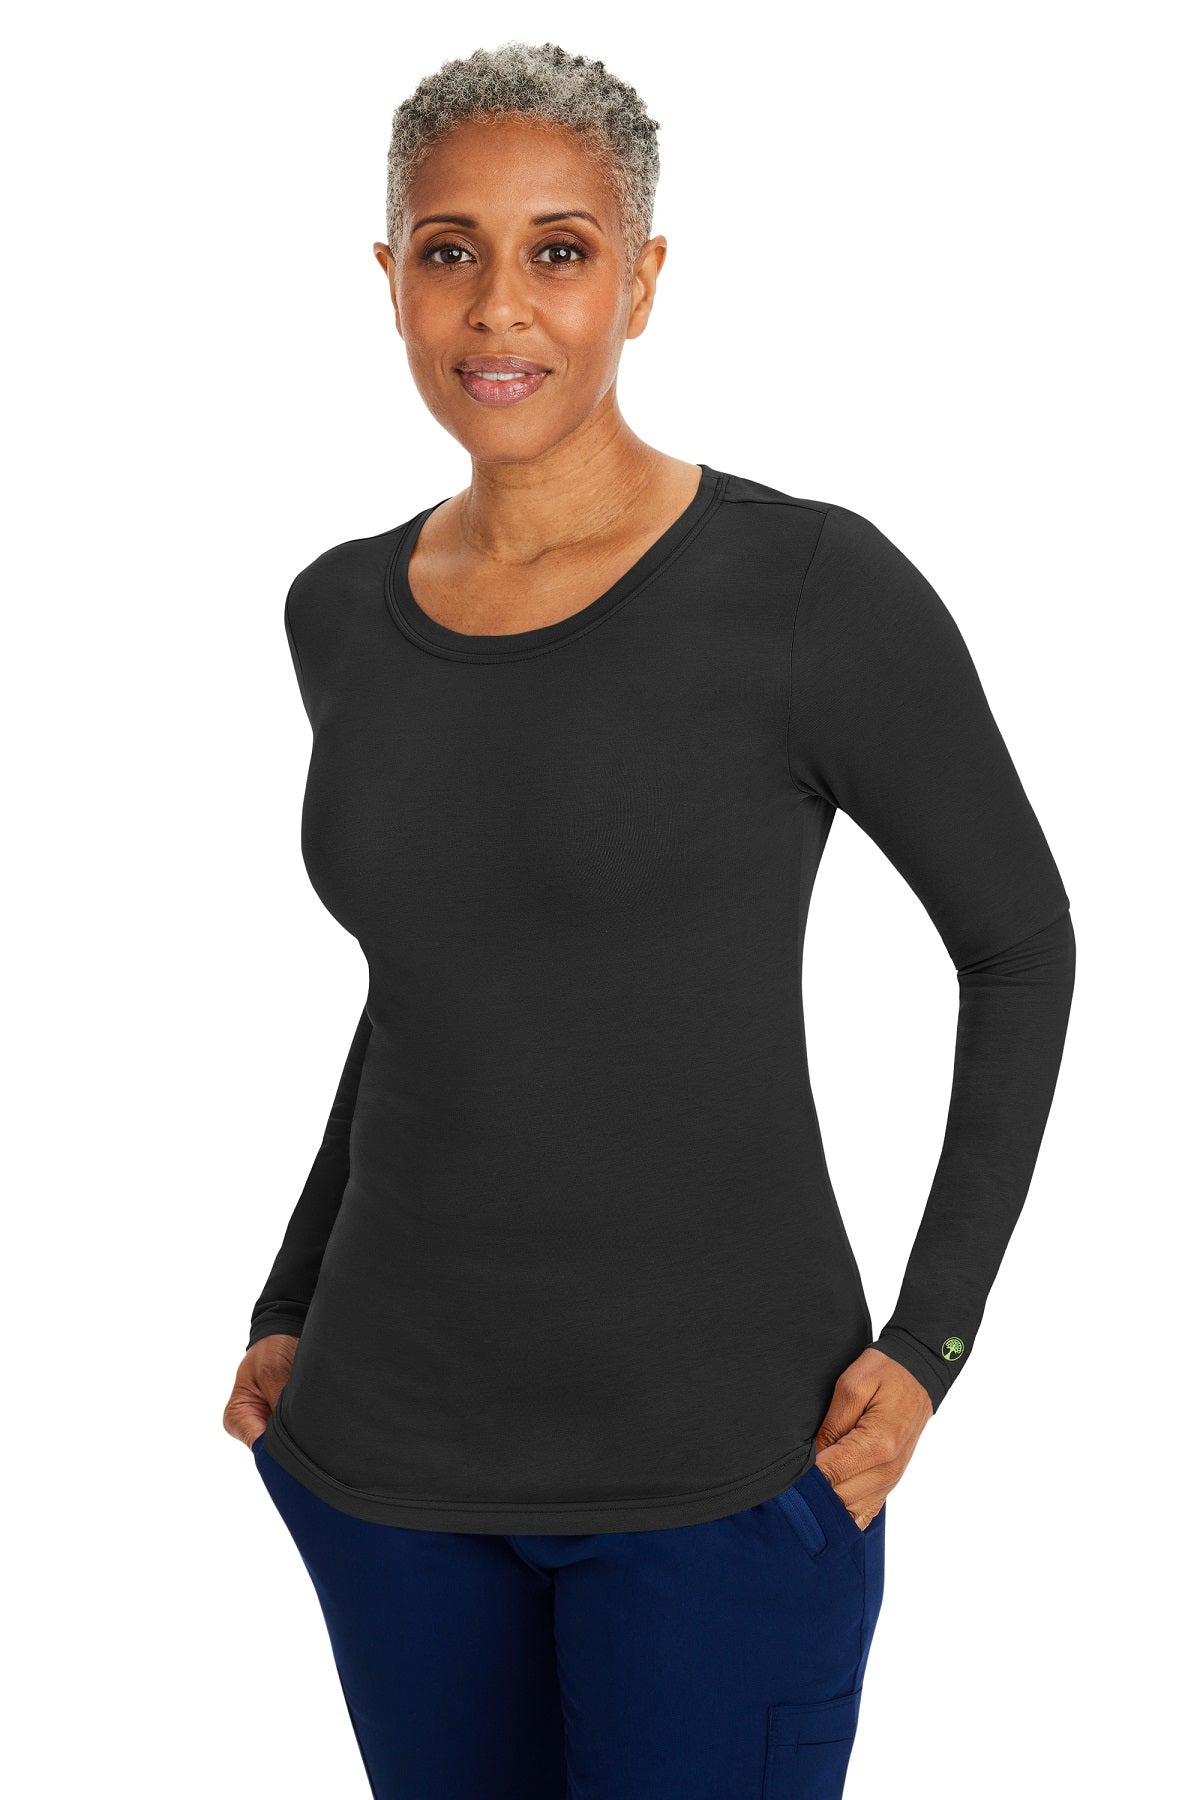 Healing Hands Purple Label Melissa Long Sleeve Tee in Black at Parker's Clothing and Shoes.